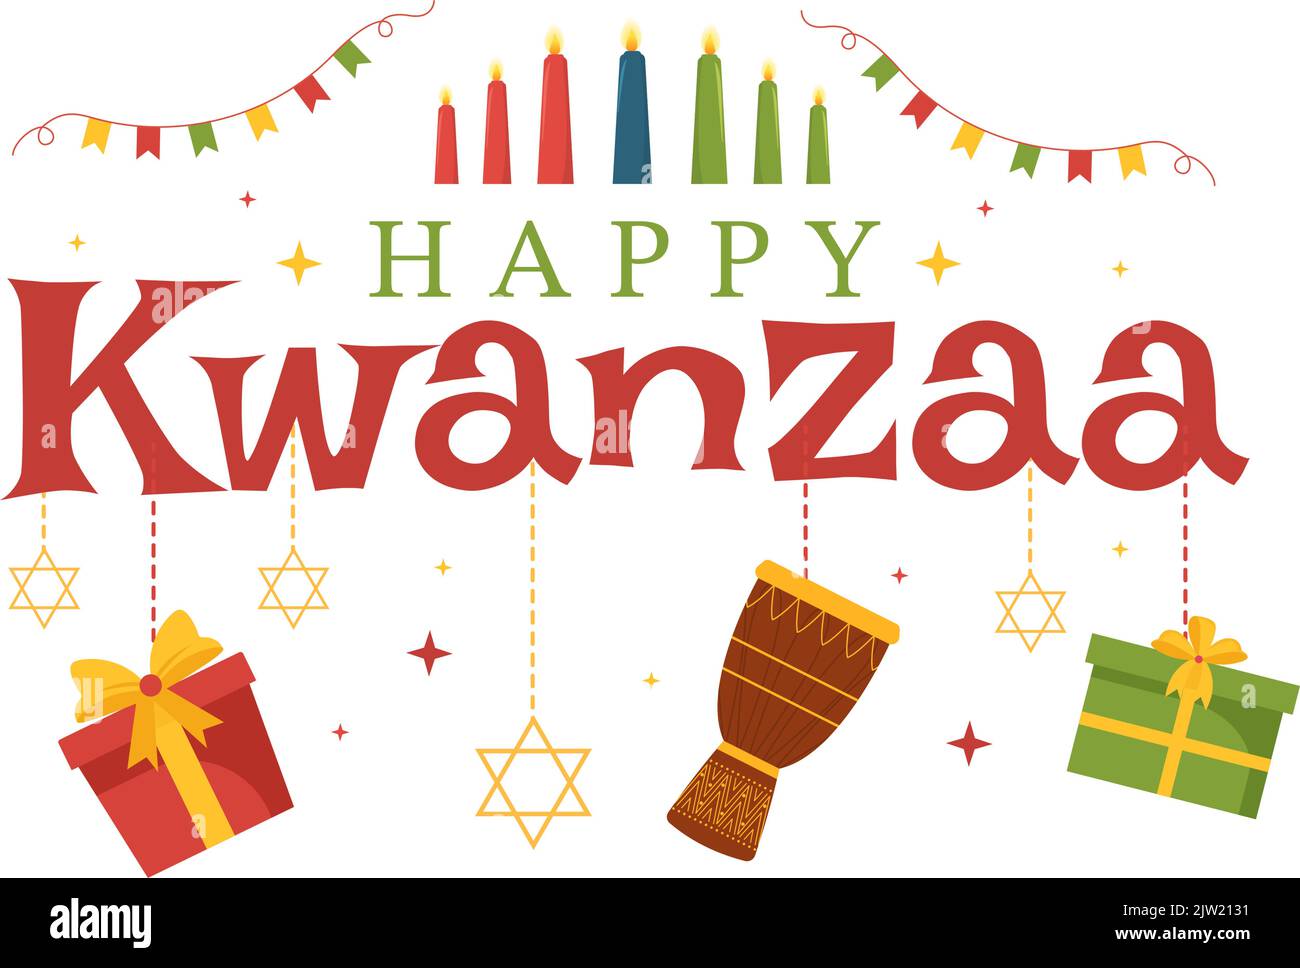 Happy Kwanzaa Holiday African Template Handgezeichnete Cartoon flache Illustration mit Order of Name of 7 Principles in Candles Symbols Design Stock Vektor